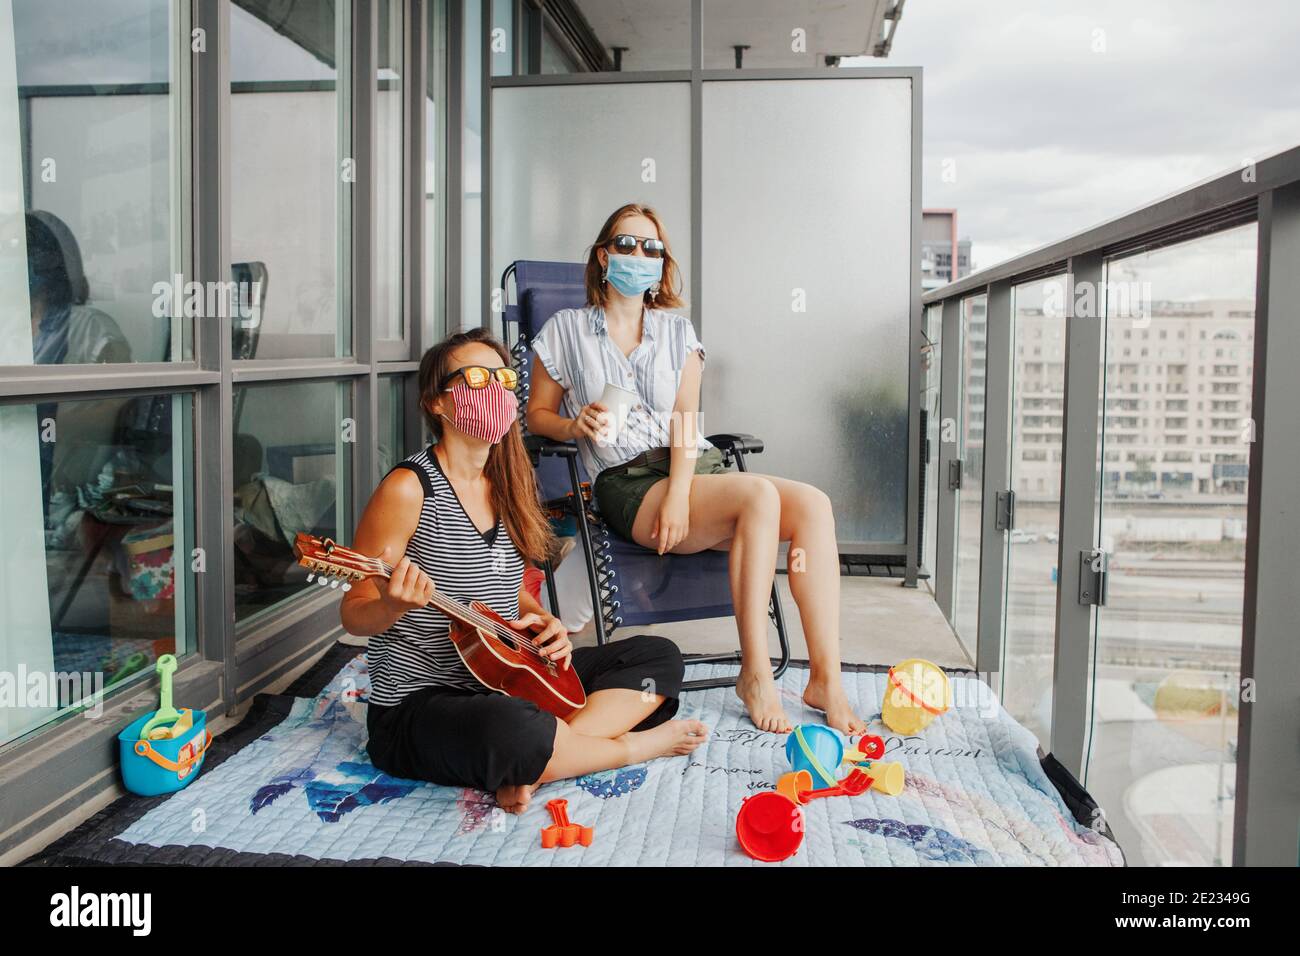 Young lesbian lgbtq women family spending time together on balcony at home. Staycation during coronavirus covid-19 pandemic in the world. Stock Photo